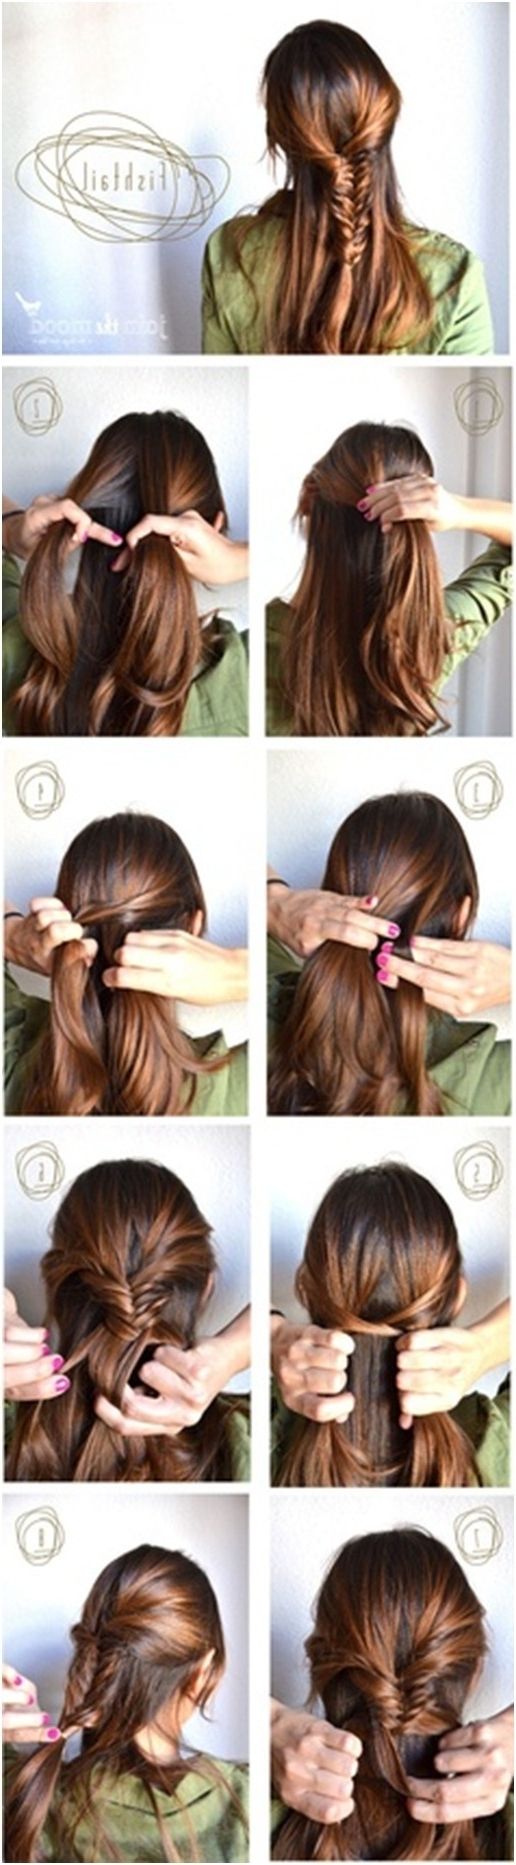 Fishtail Braided Hairstyles Tutorials: Trendy Hairstyles – Popular Pertaining To Recent Diy Braided Hairstyles (View 5 of 15)